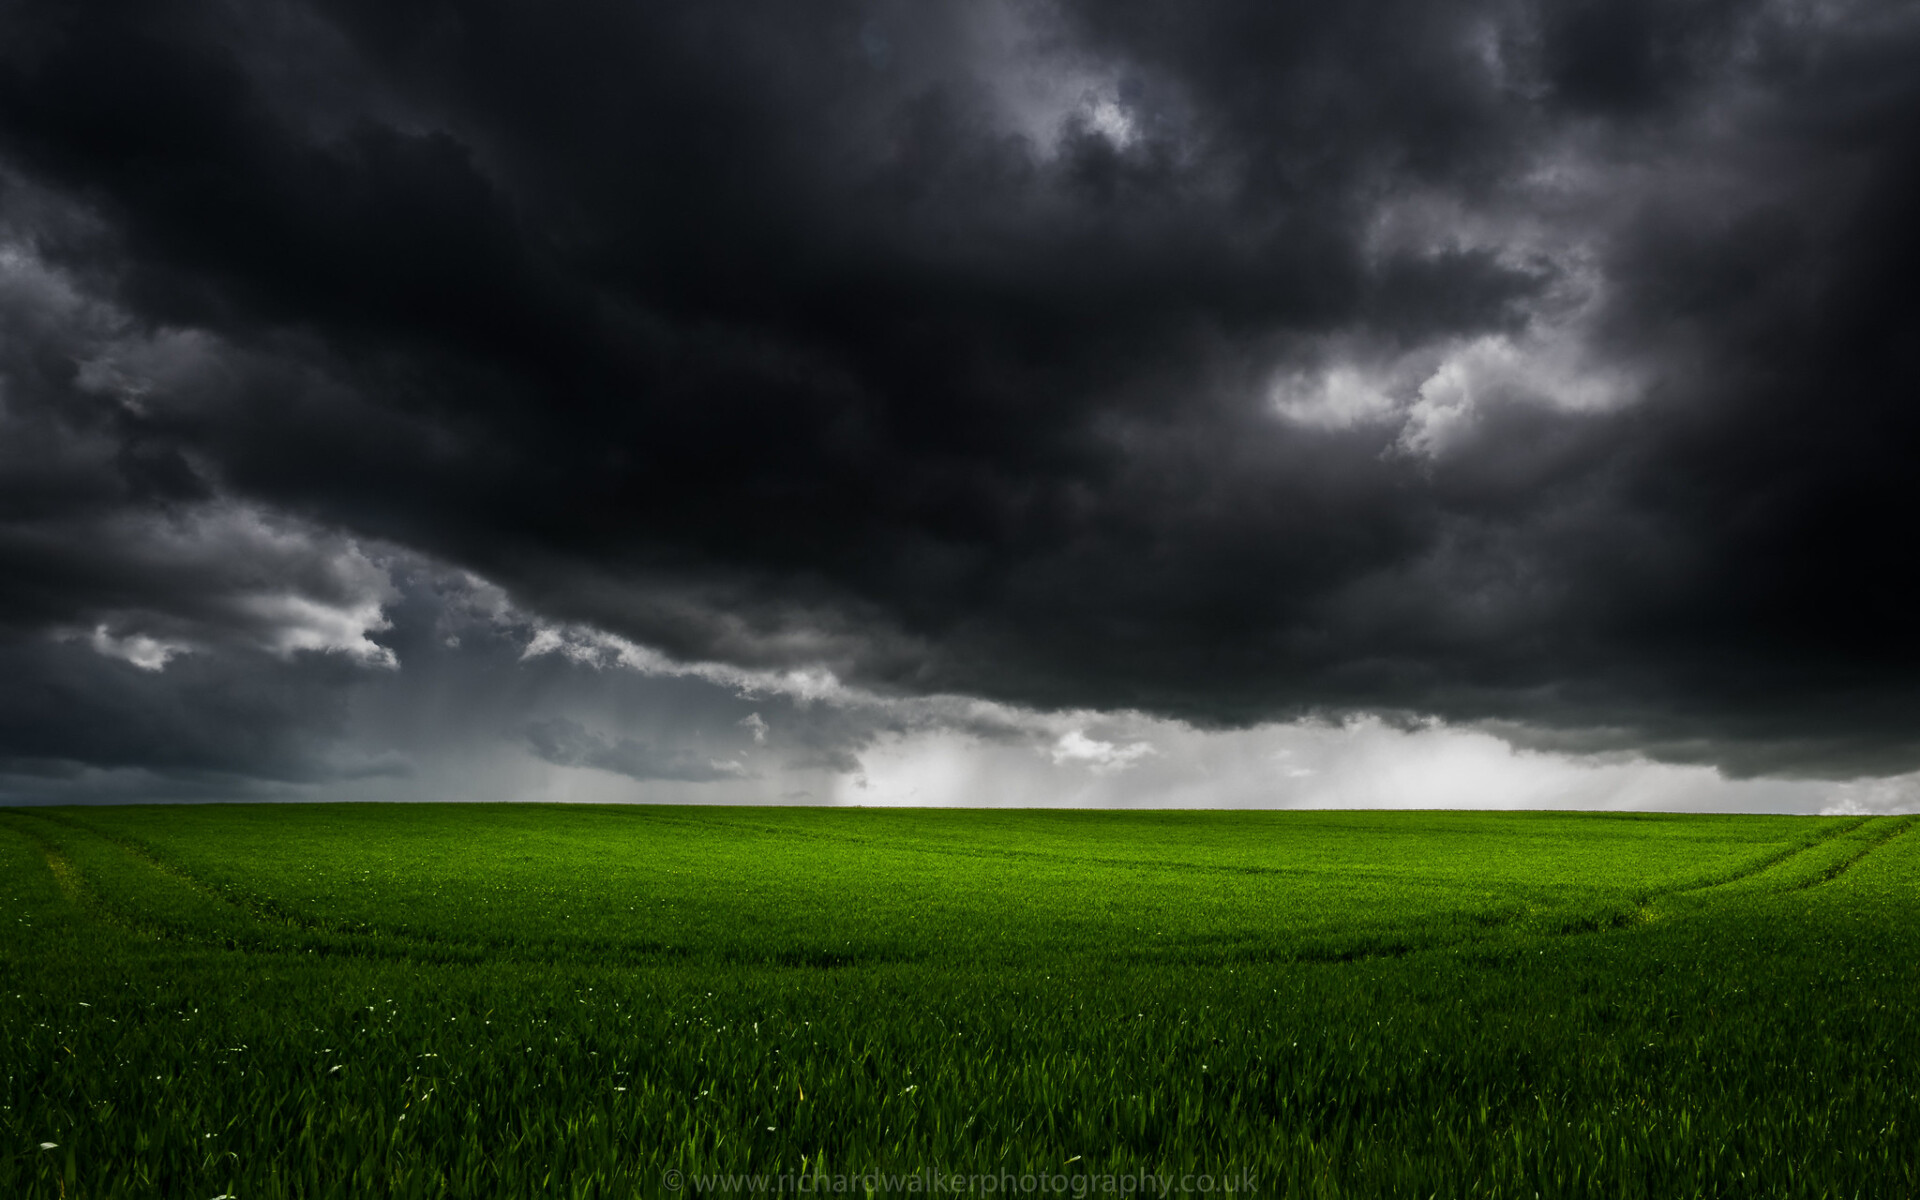 "Storm Clouds" by Richard Walker Photography is licensed under CC BY 2.0.